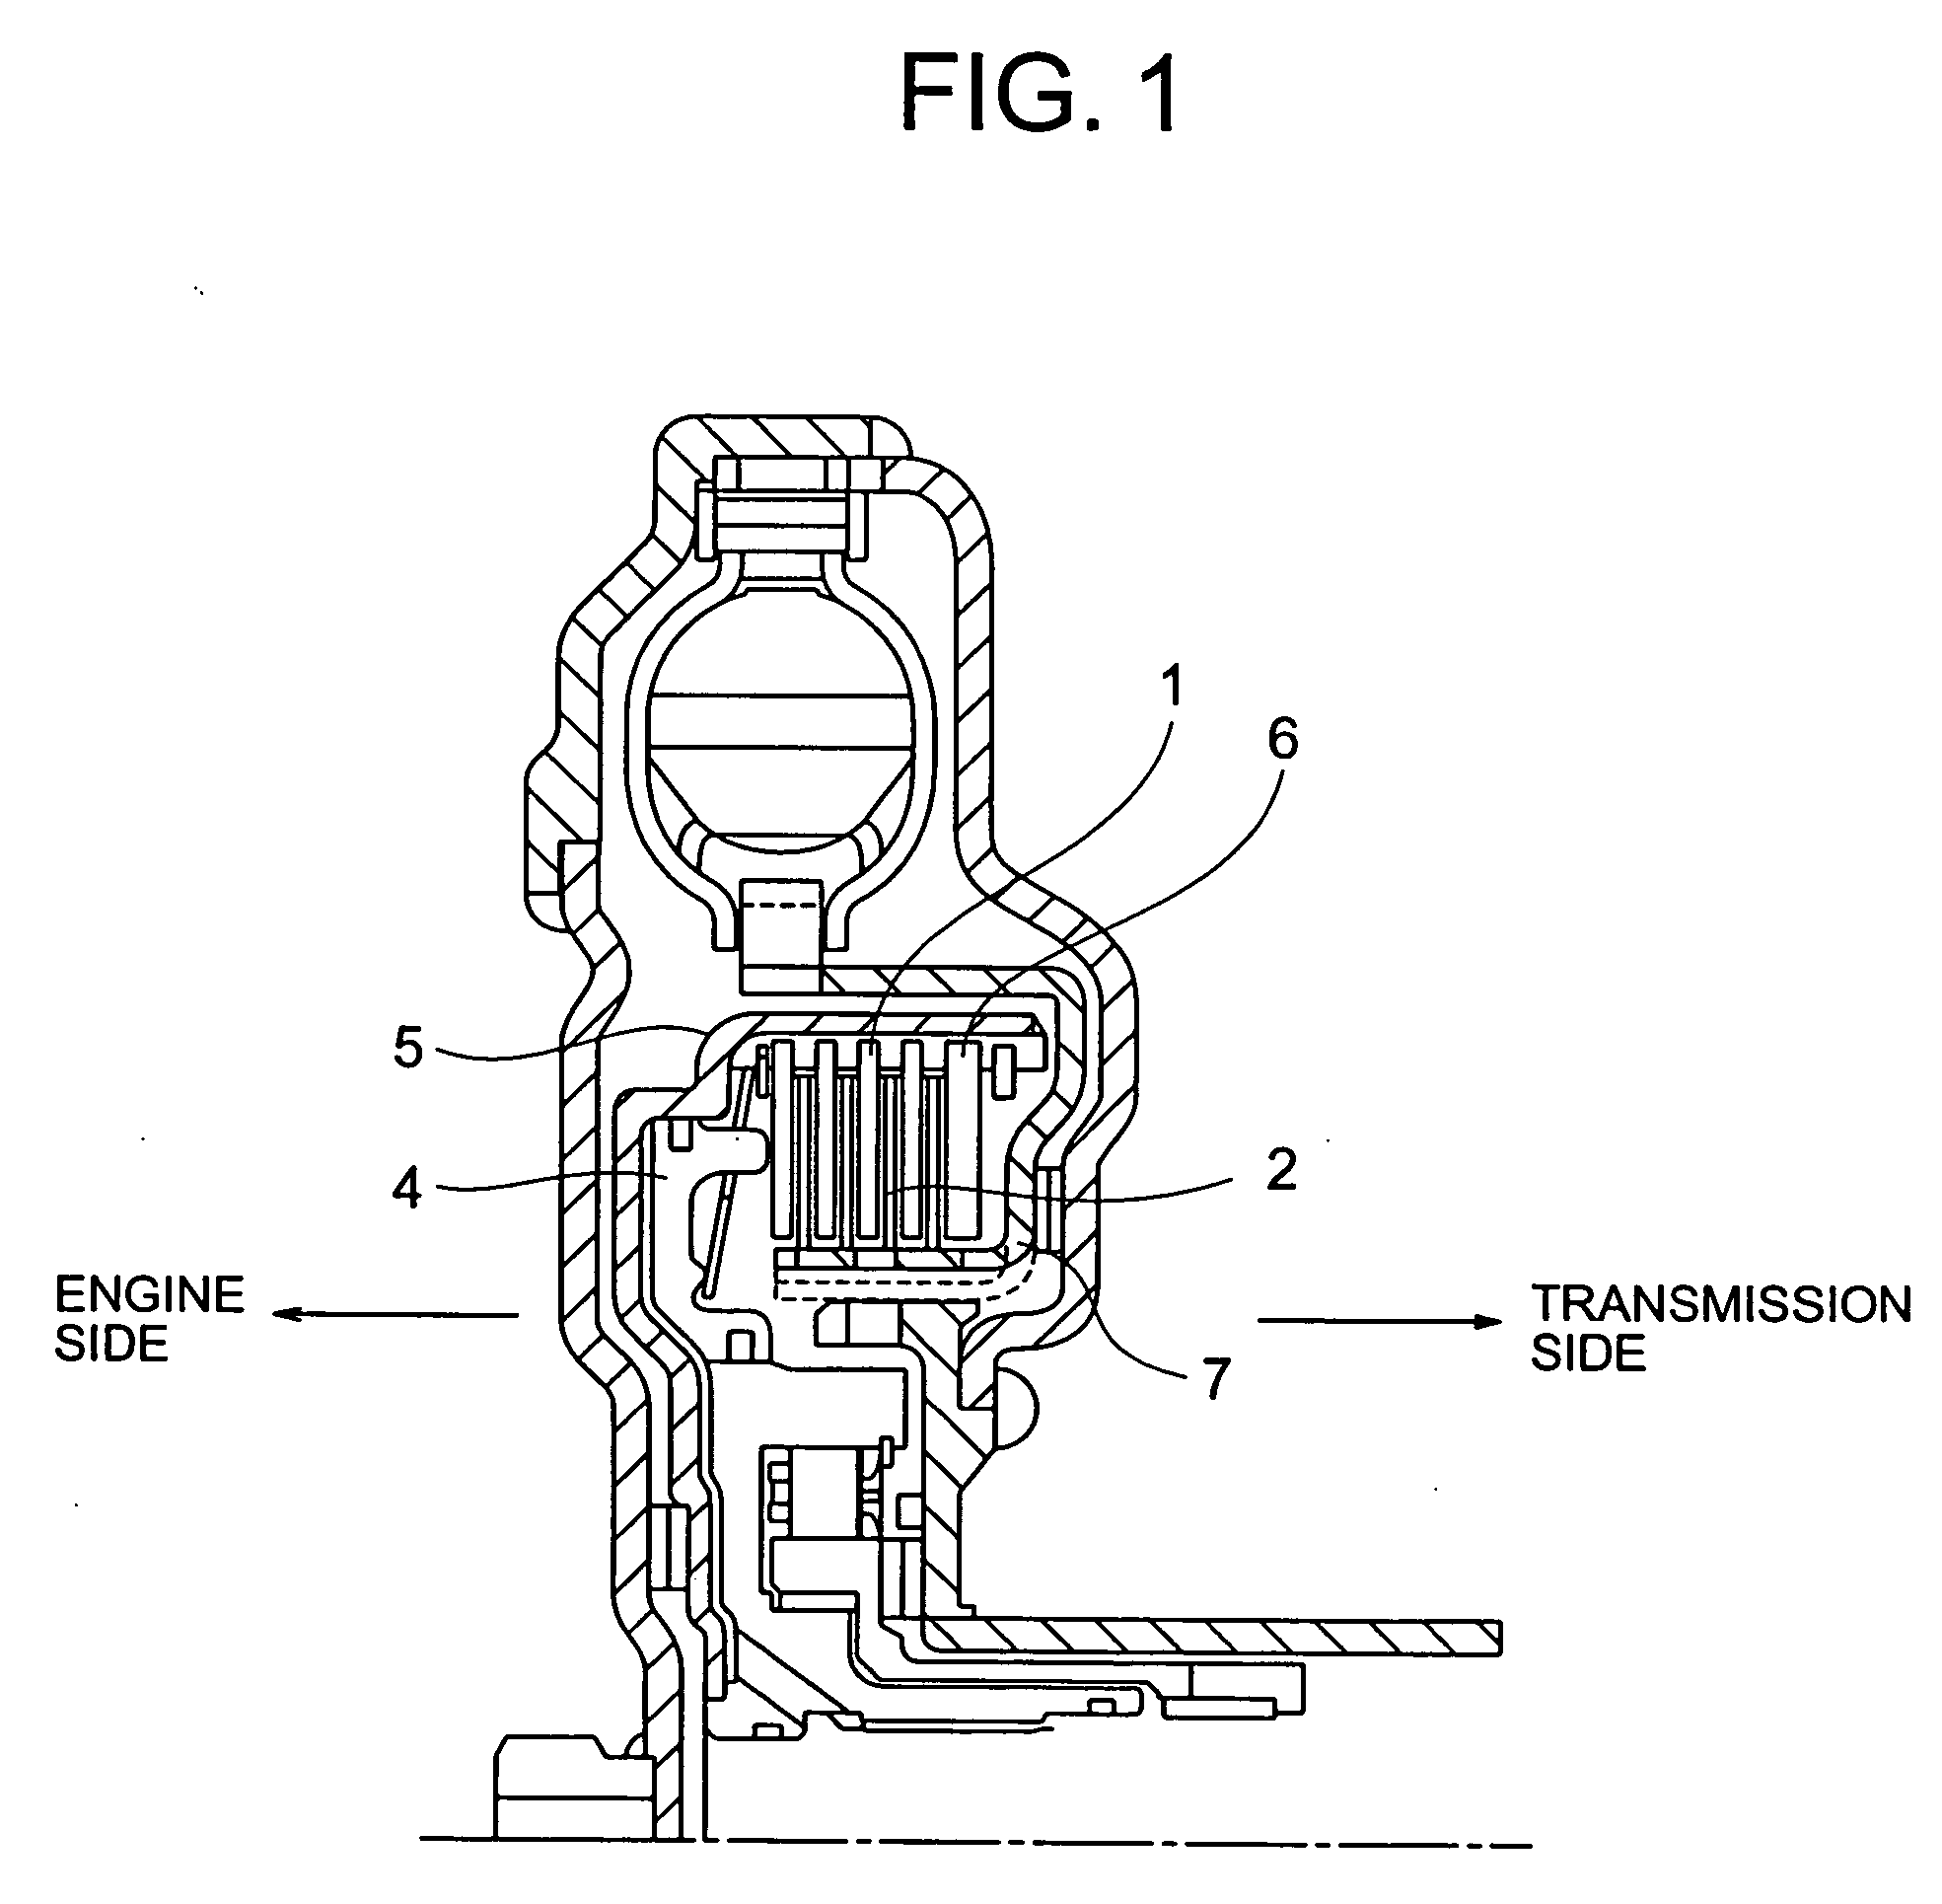 Wet clutch friction plate and multiple disc friction clutch apparatus